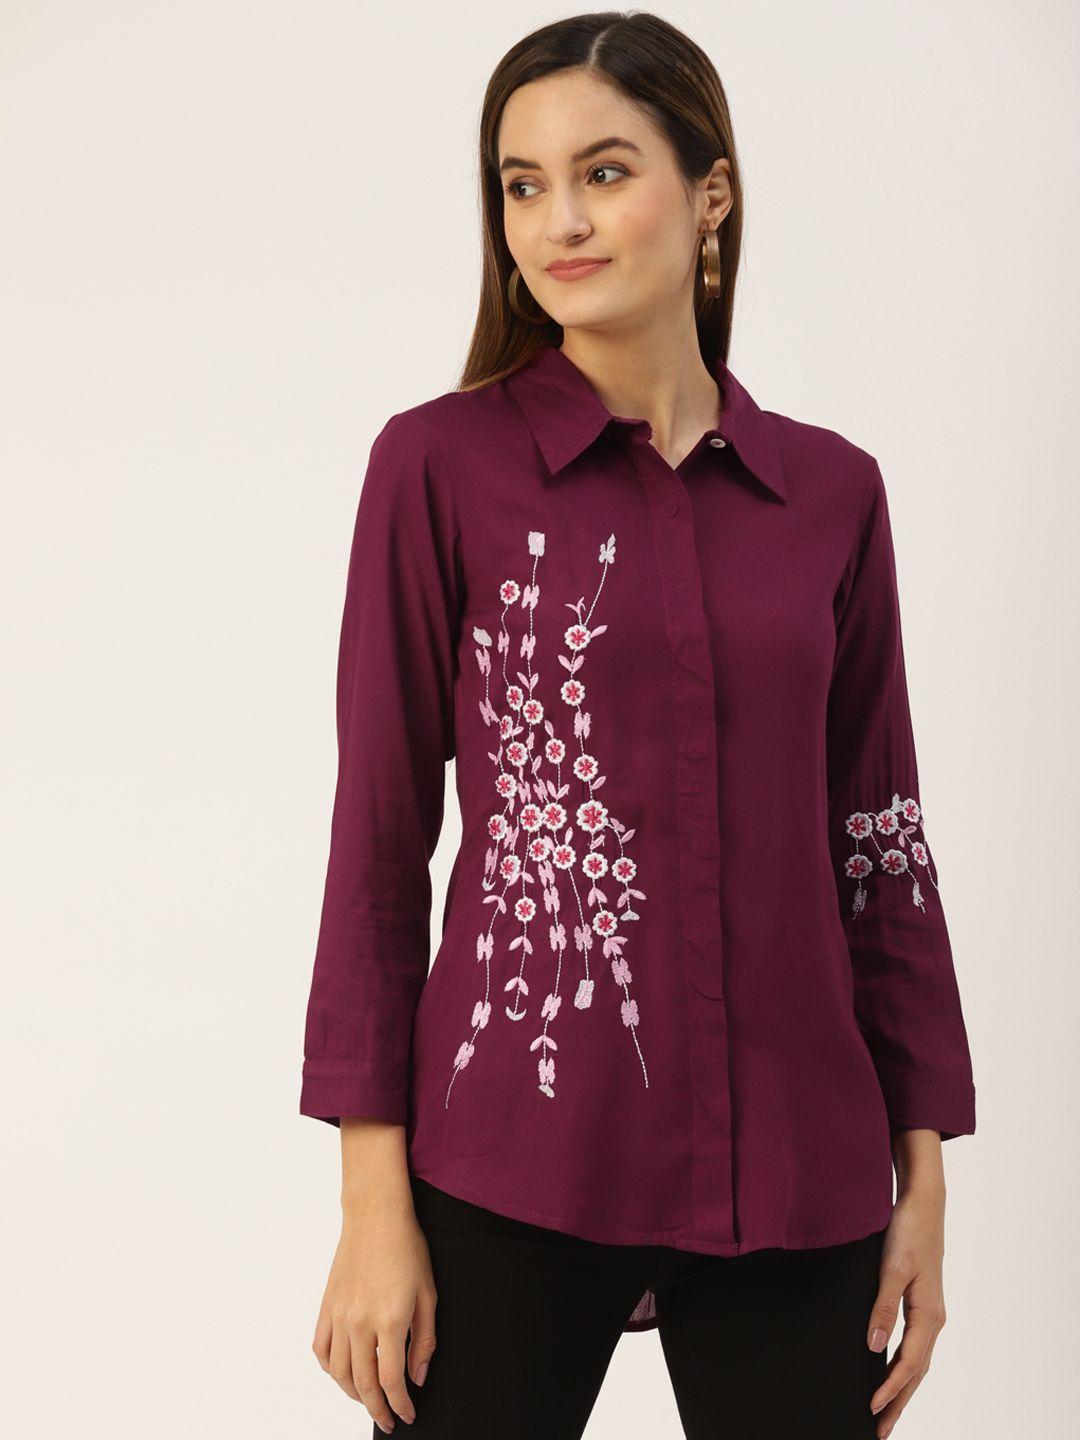 kbz maroon & white floral print shirt style top